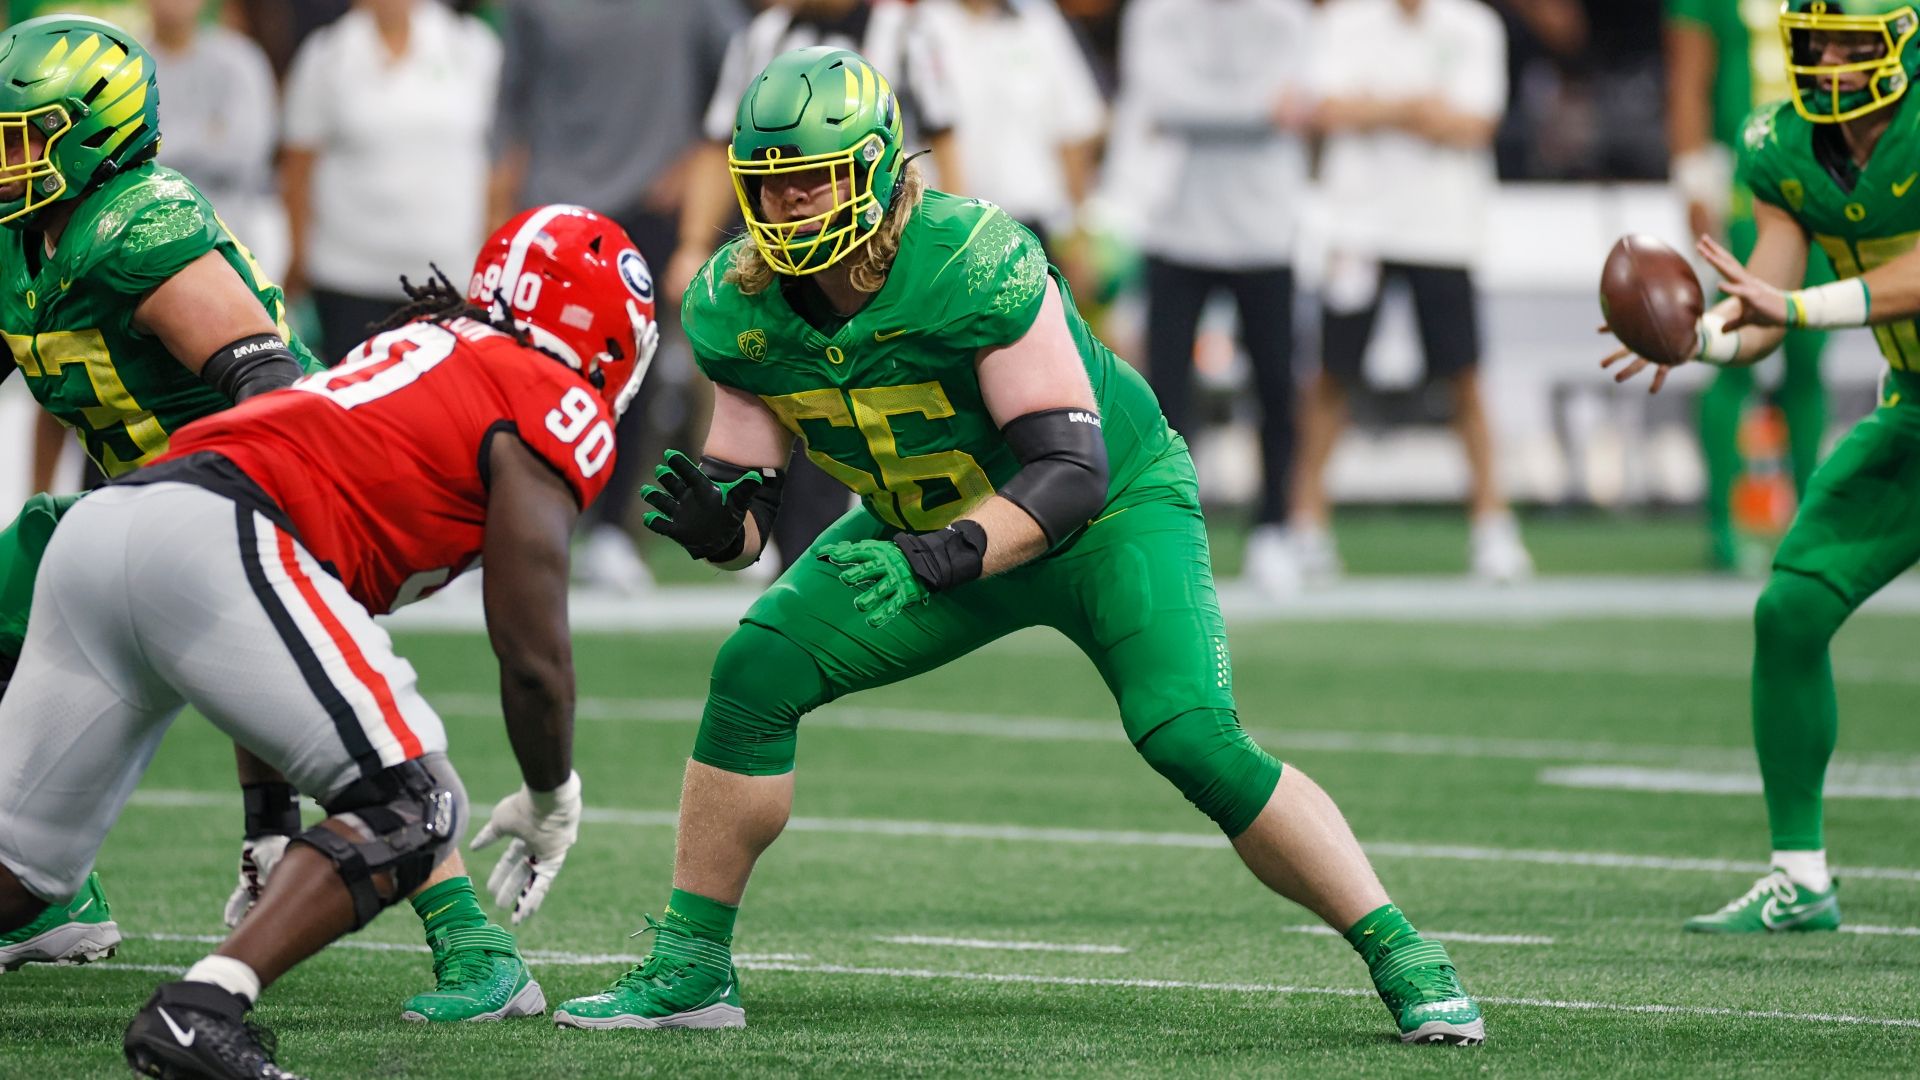 UDFA offensive lineman T.J. Bass could become a starter for the Cowboys in 2023